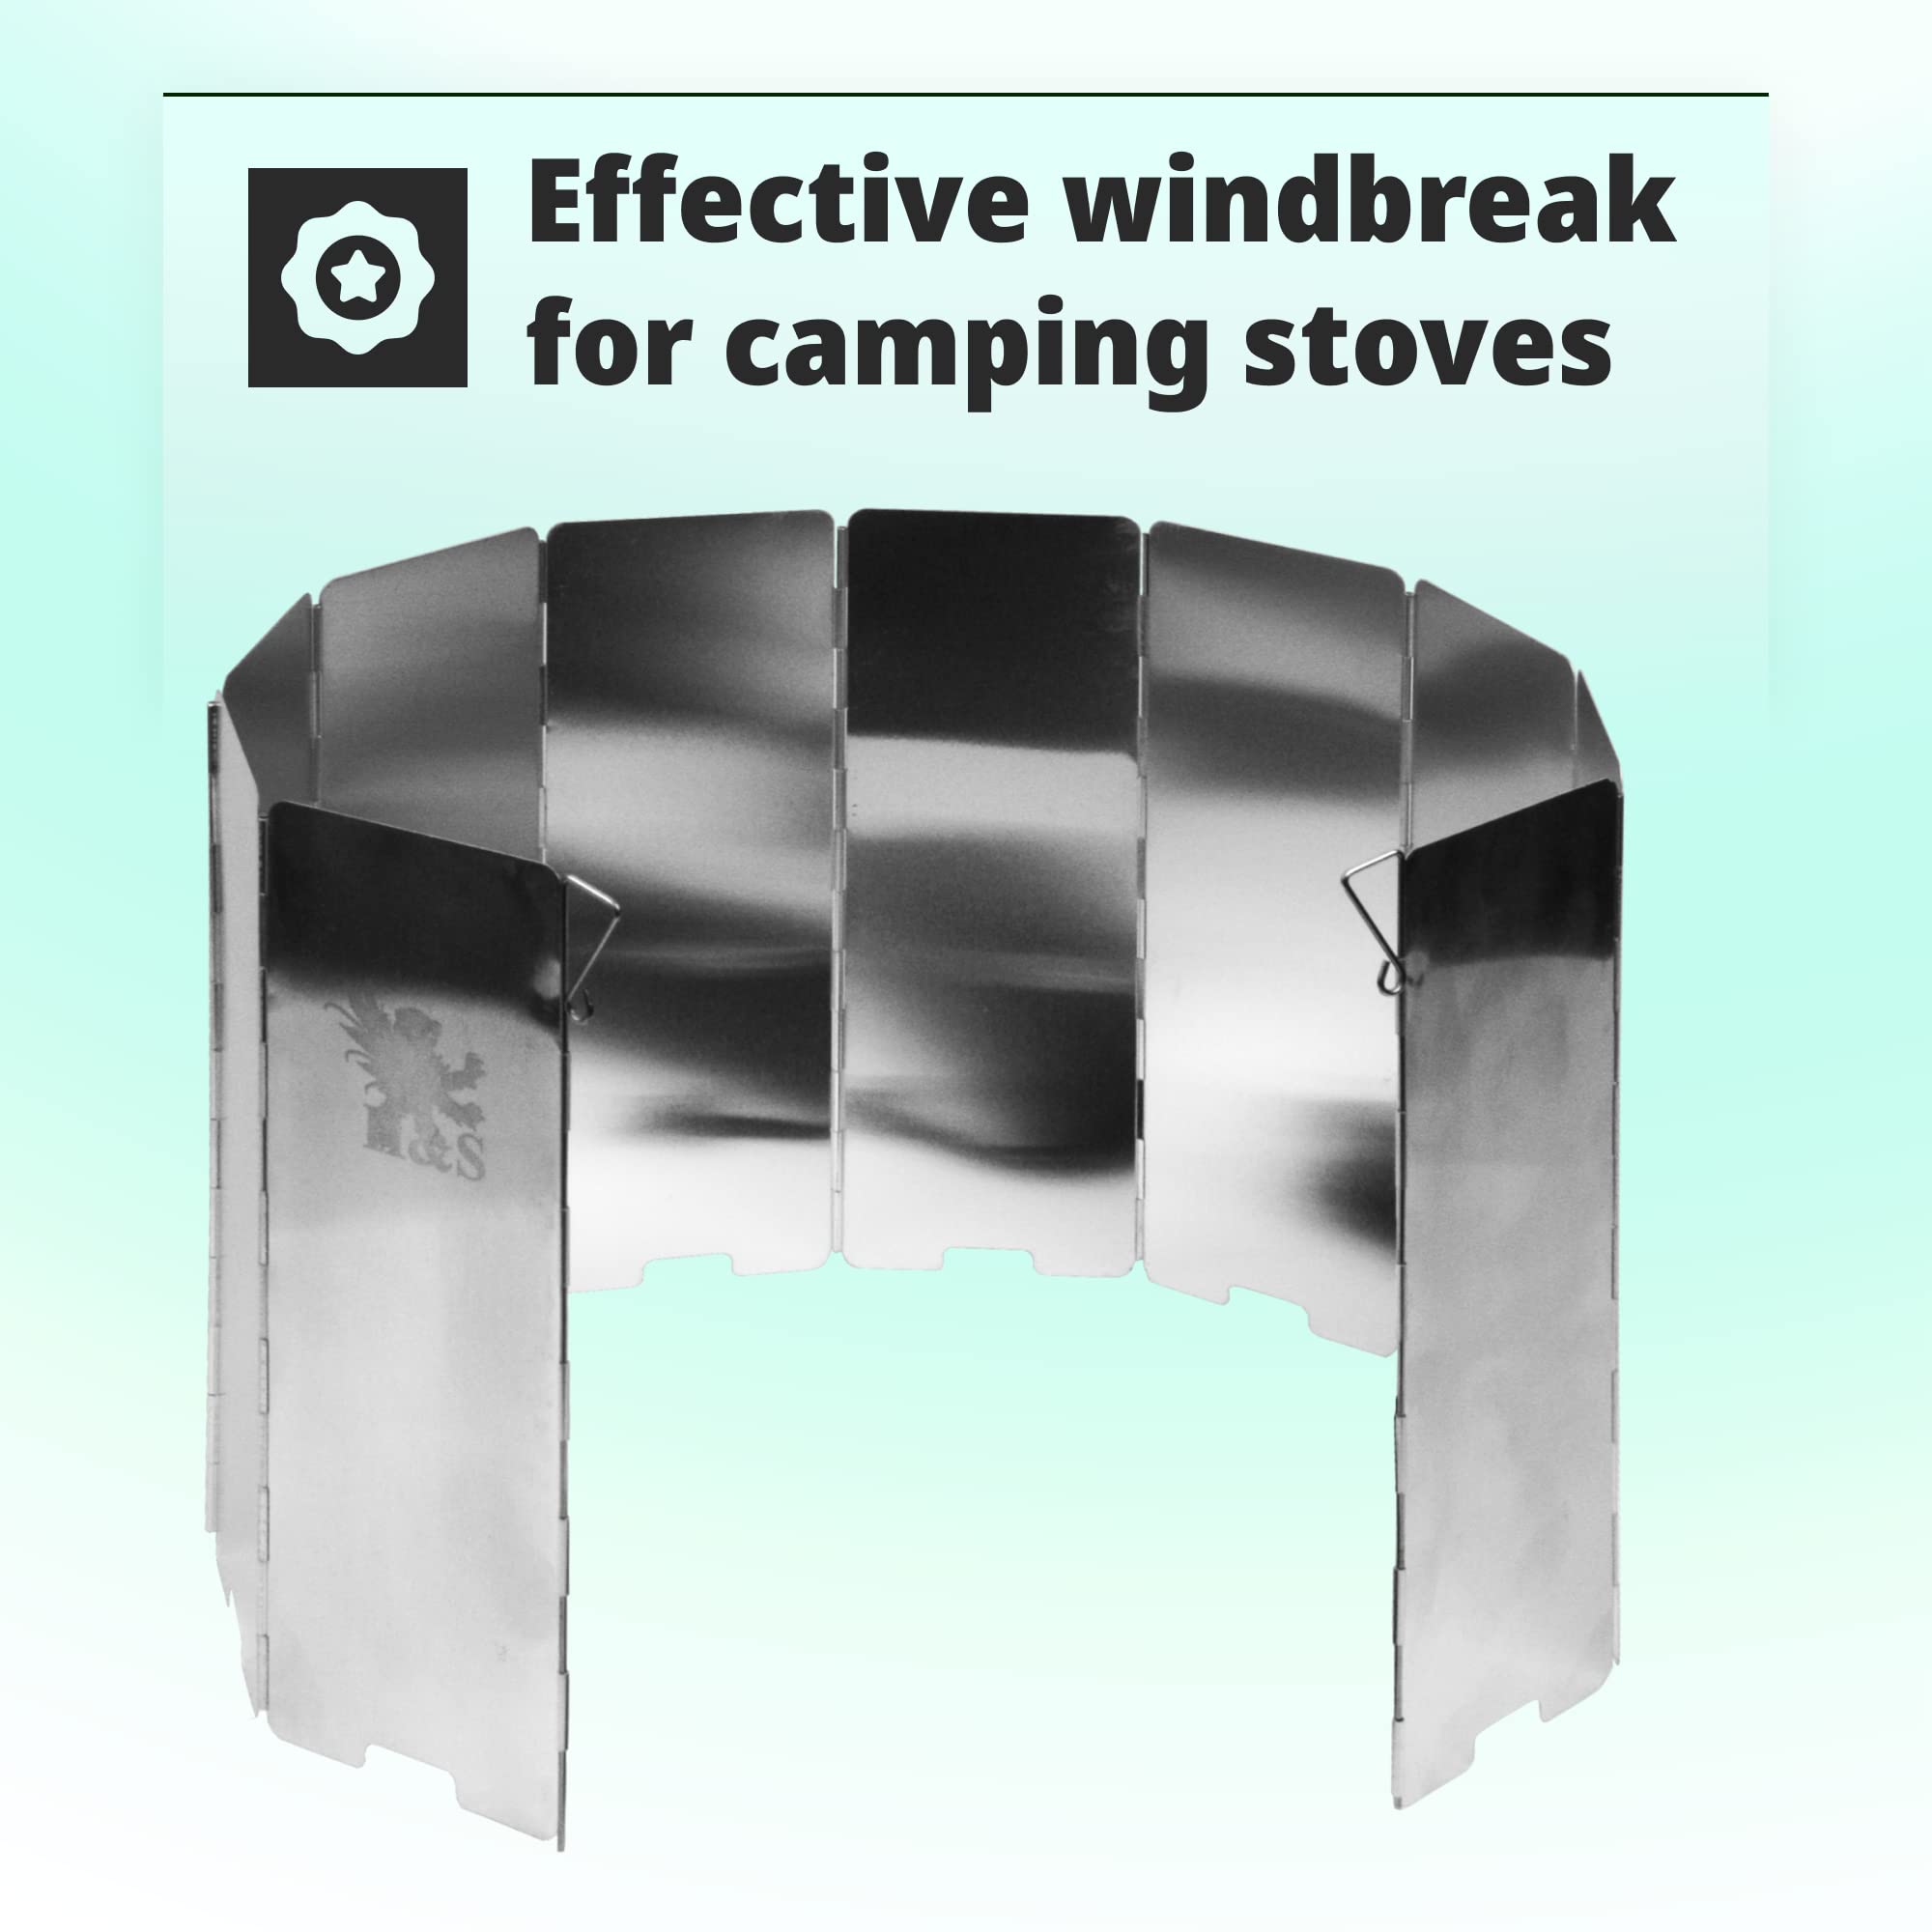 H&S 10 Plates Foldable Outdoor Camping Cooker Wind Screen Gas Stove Windshield - Wind Shield For Camping Stove - Foldable Camping Stove Windscreen - Camping Stove Windbreak - Hiking Cooking Equipment